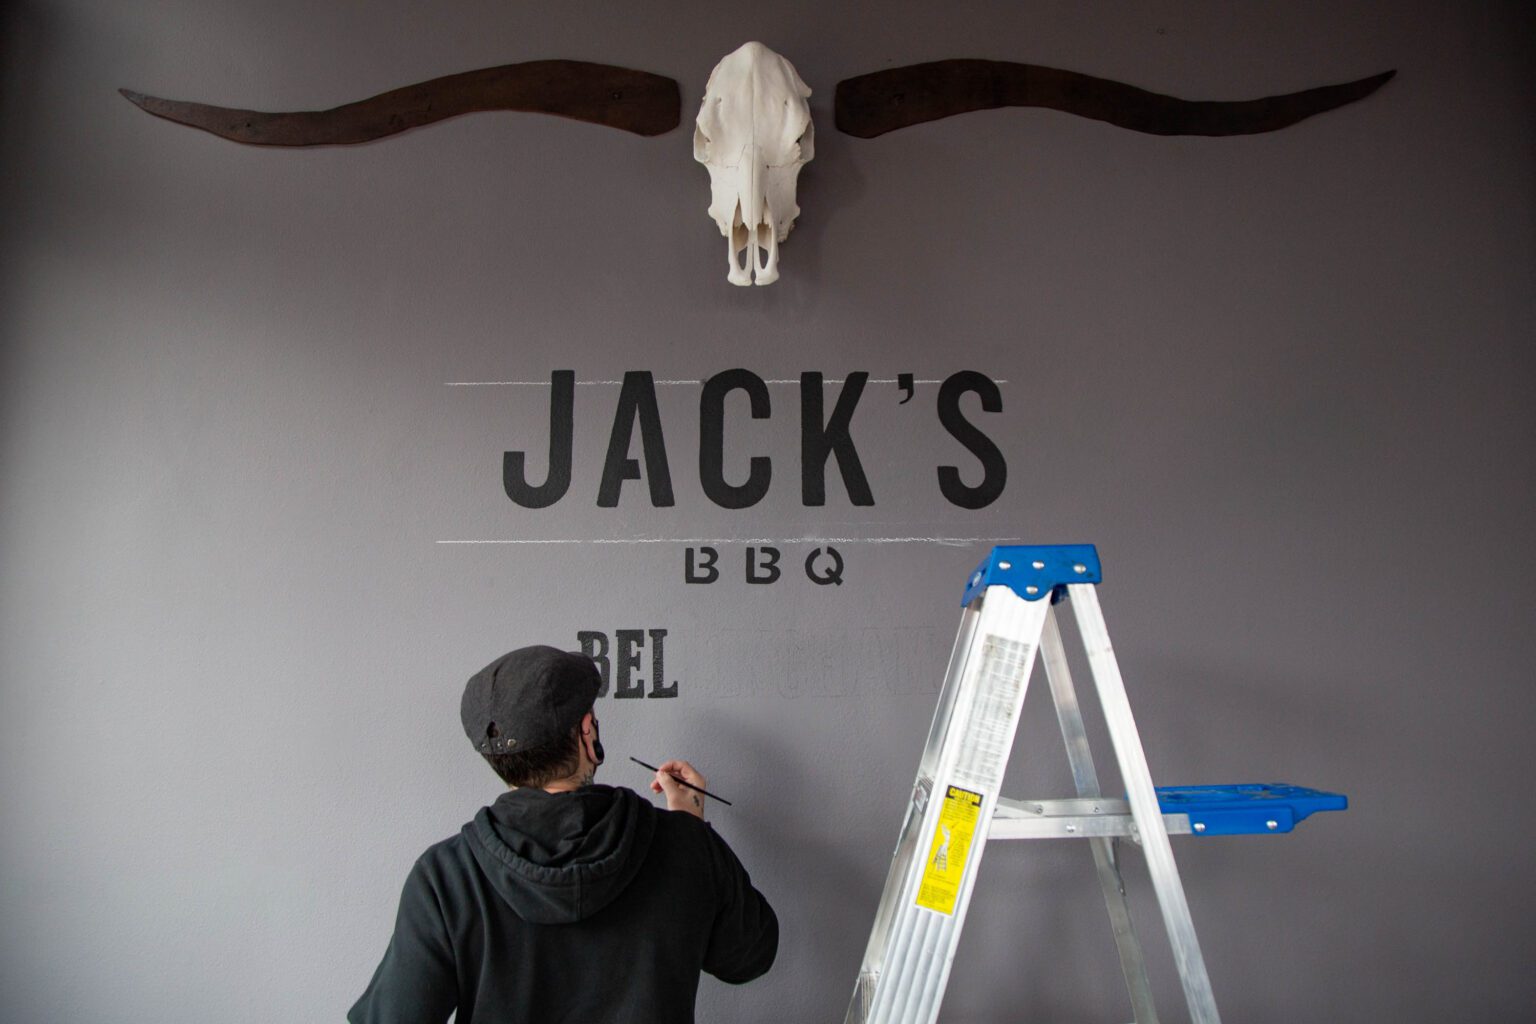 Kitchen manager Colby Fowler paints the Jack's BBQ logo on the wall of the restaurant on Feb. 16. Fowler